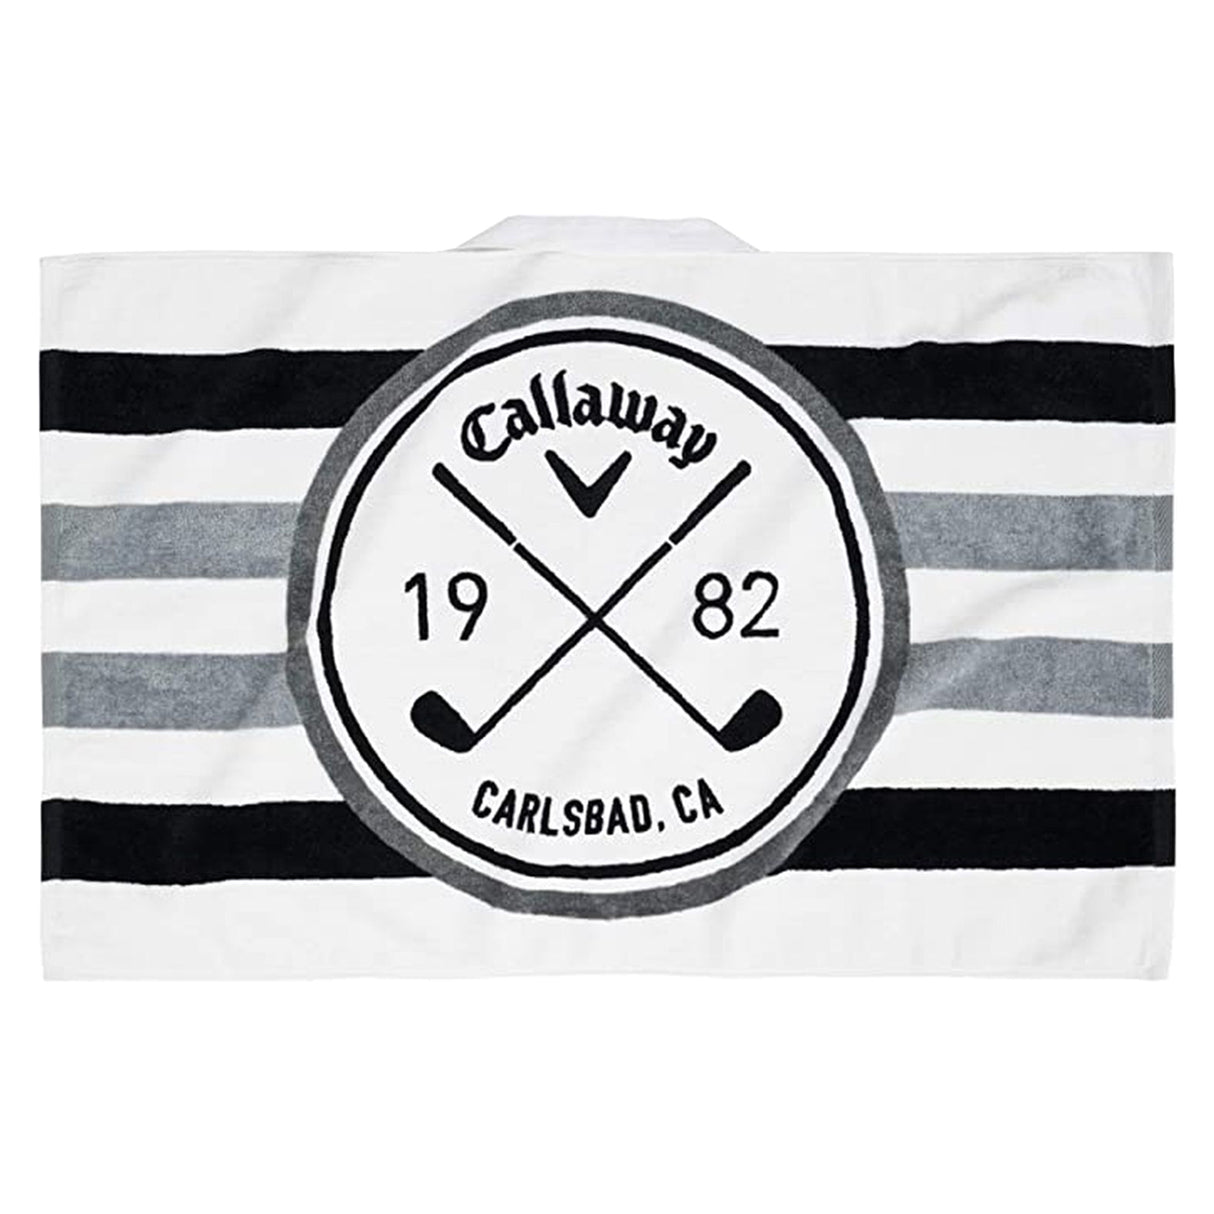 Callaway Tour Authentic 30 x 20 inch Golf Bag Towel - White/Black/Charcoal